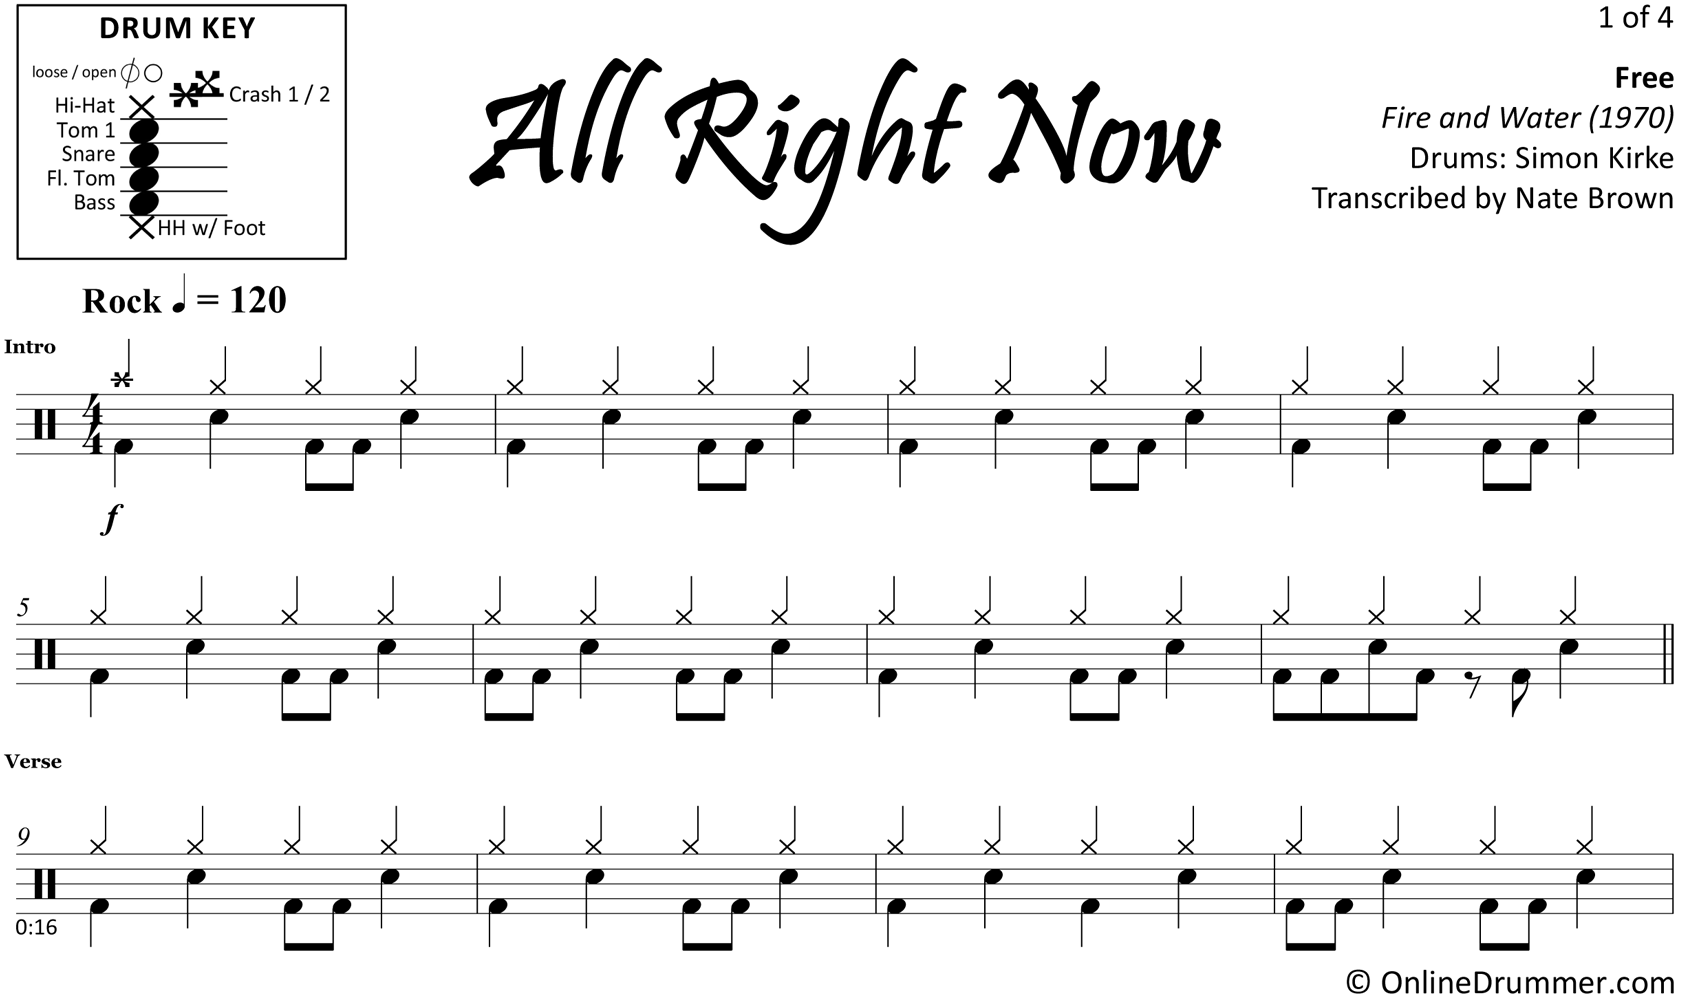 All Right Now - Free - Drum Sheet Music